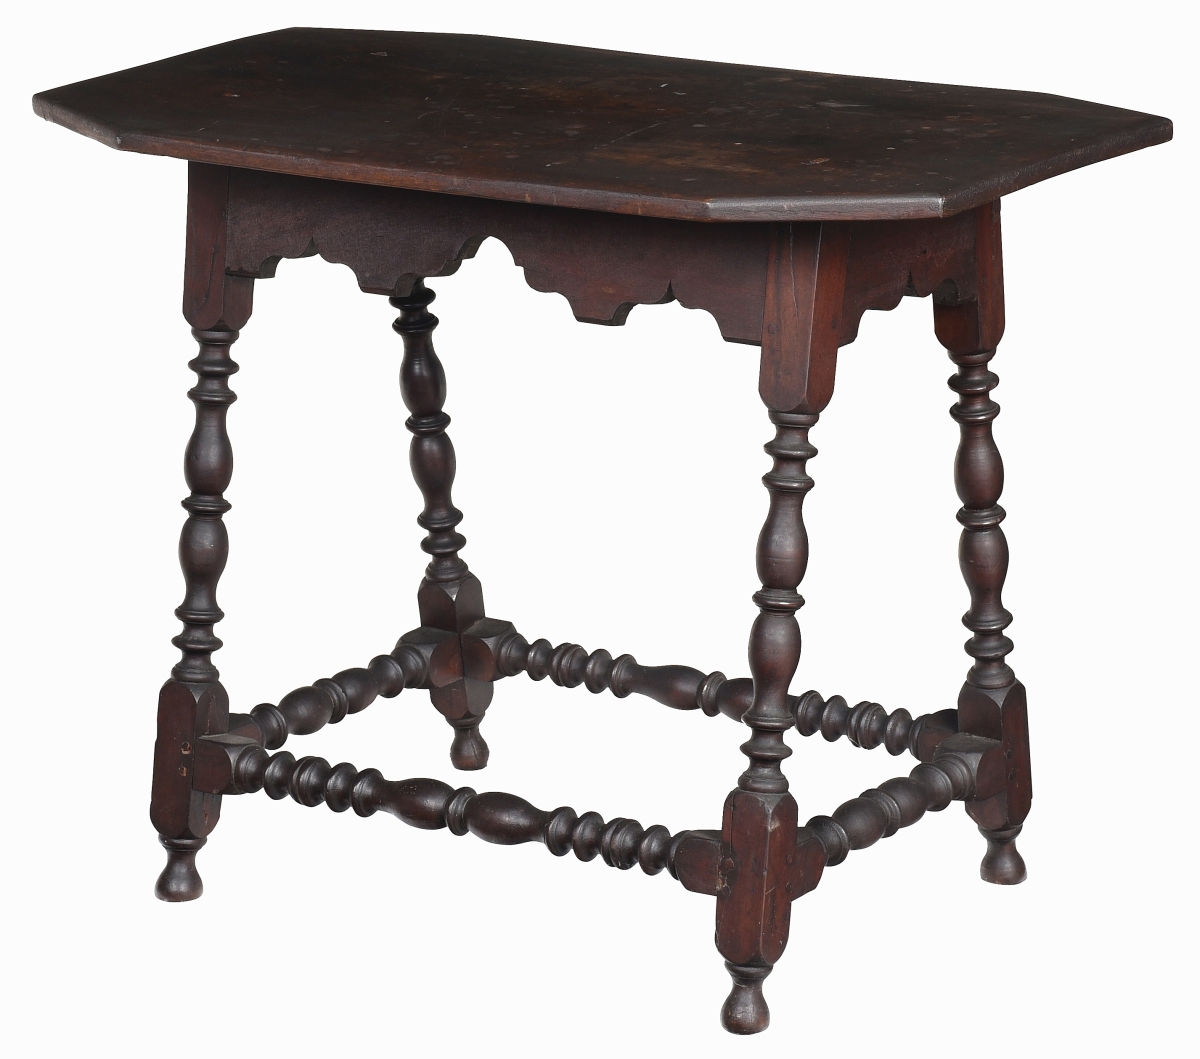 “It’s so over the top and so good. It really was an A-plus Boston table,” Brunk said of this Boston area William and Mary table from the Godfrey collection that sold to a private American collector on the phone for $135,300. He had sent the table for scientific analysis that confirmed that the top and rails were original ($25/35,000).